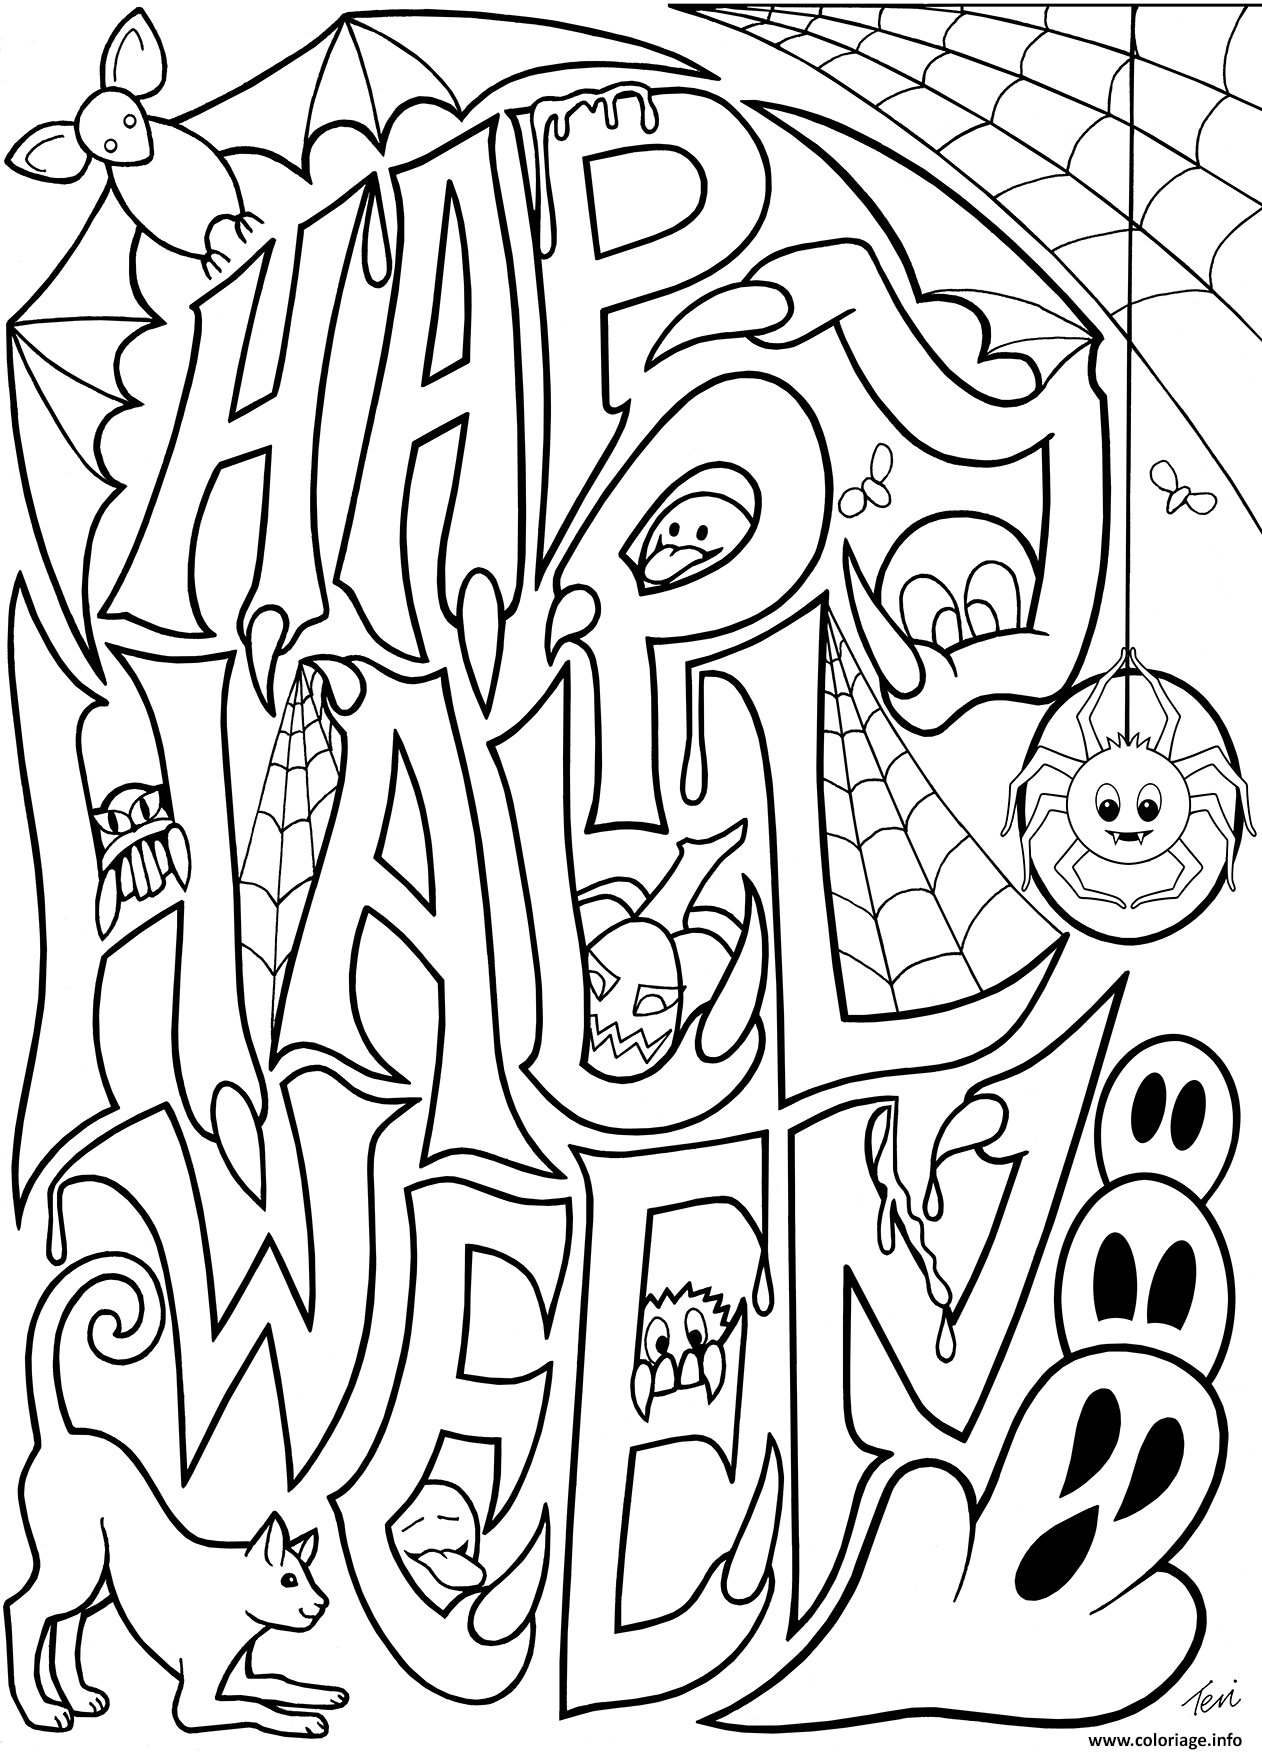 halloween-free-to-color-for-children-halloween-kids-coloring-pages